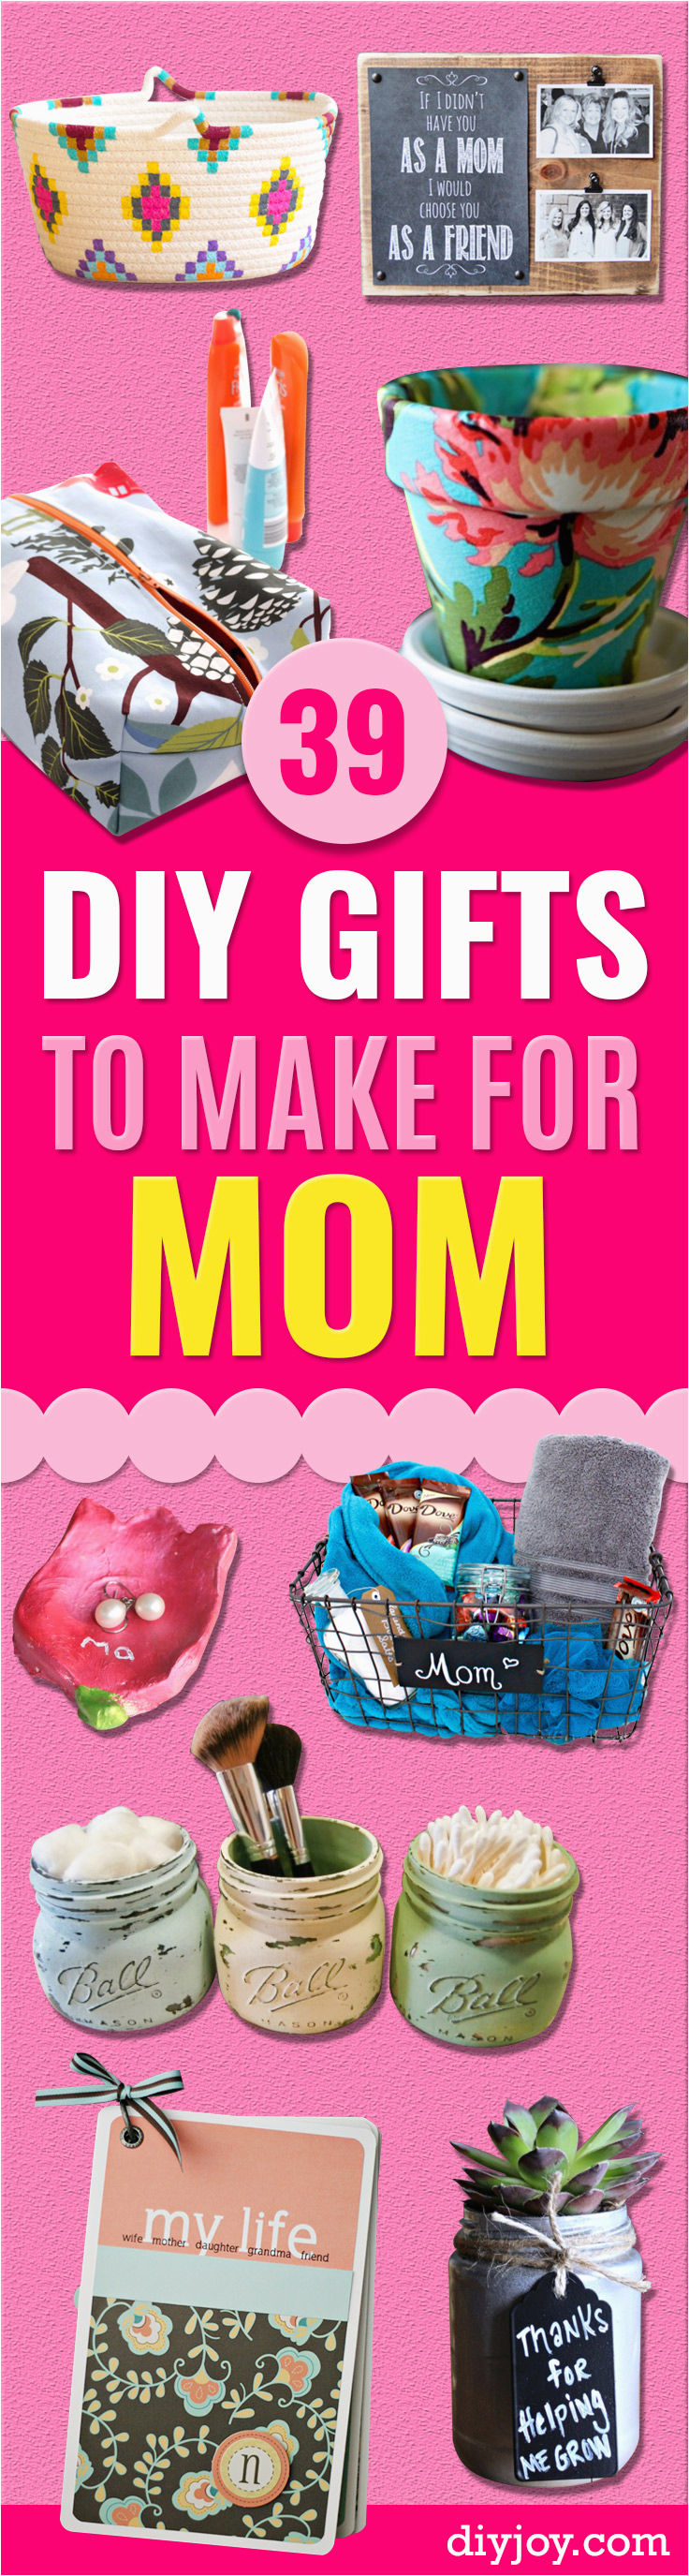 Gifts to Give Your Mom for Her Birthday 39 Creative Diy Gifts to Make for Mom